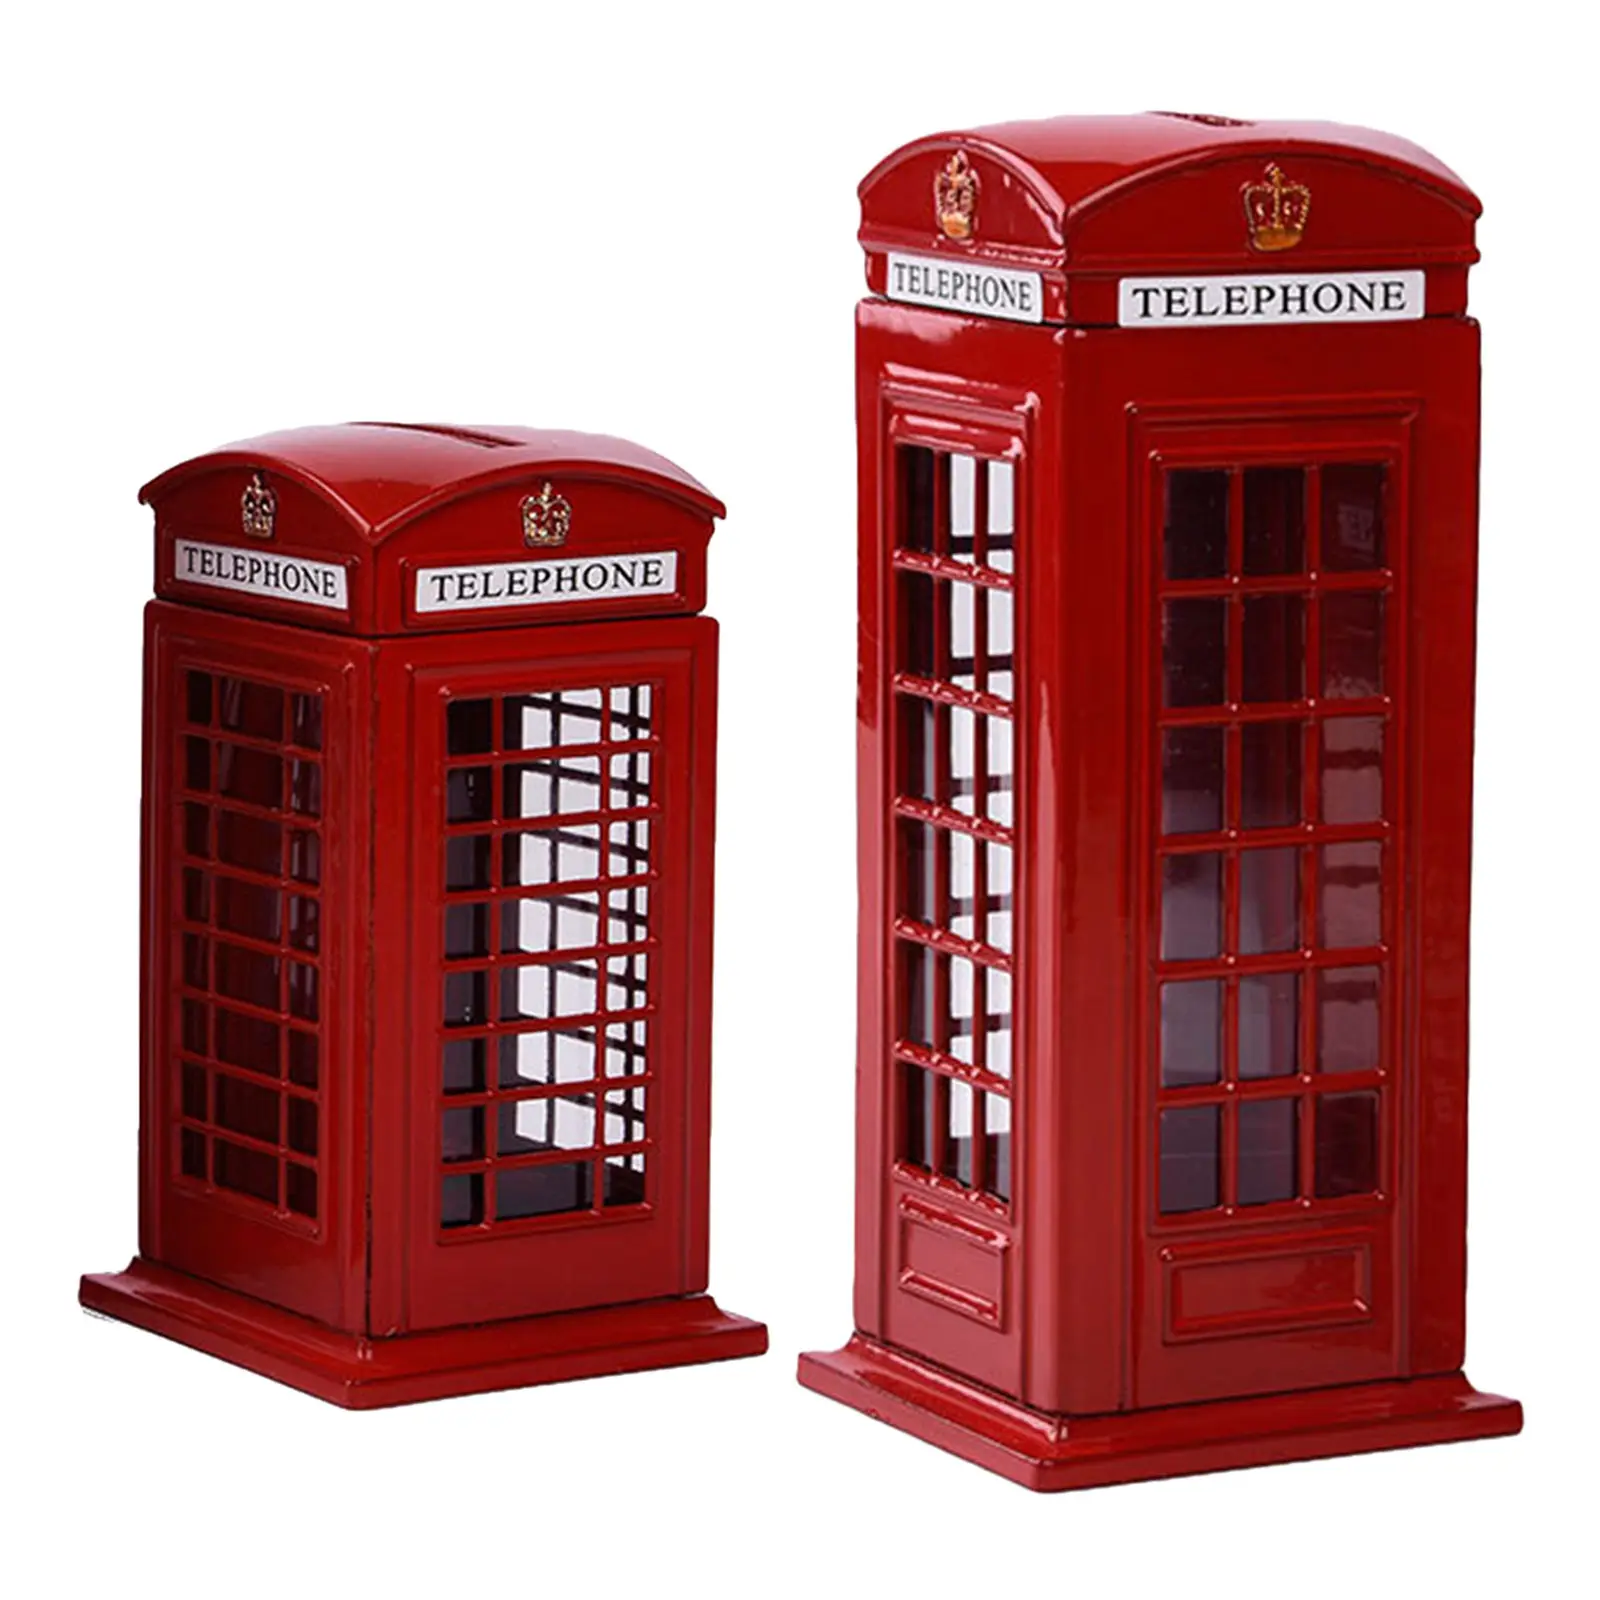 Metal Red British English London Telephone Booth Bank Coin Bank Saving Pot Piggy Bank Red Phone Booth Box Decor Container